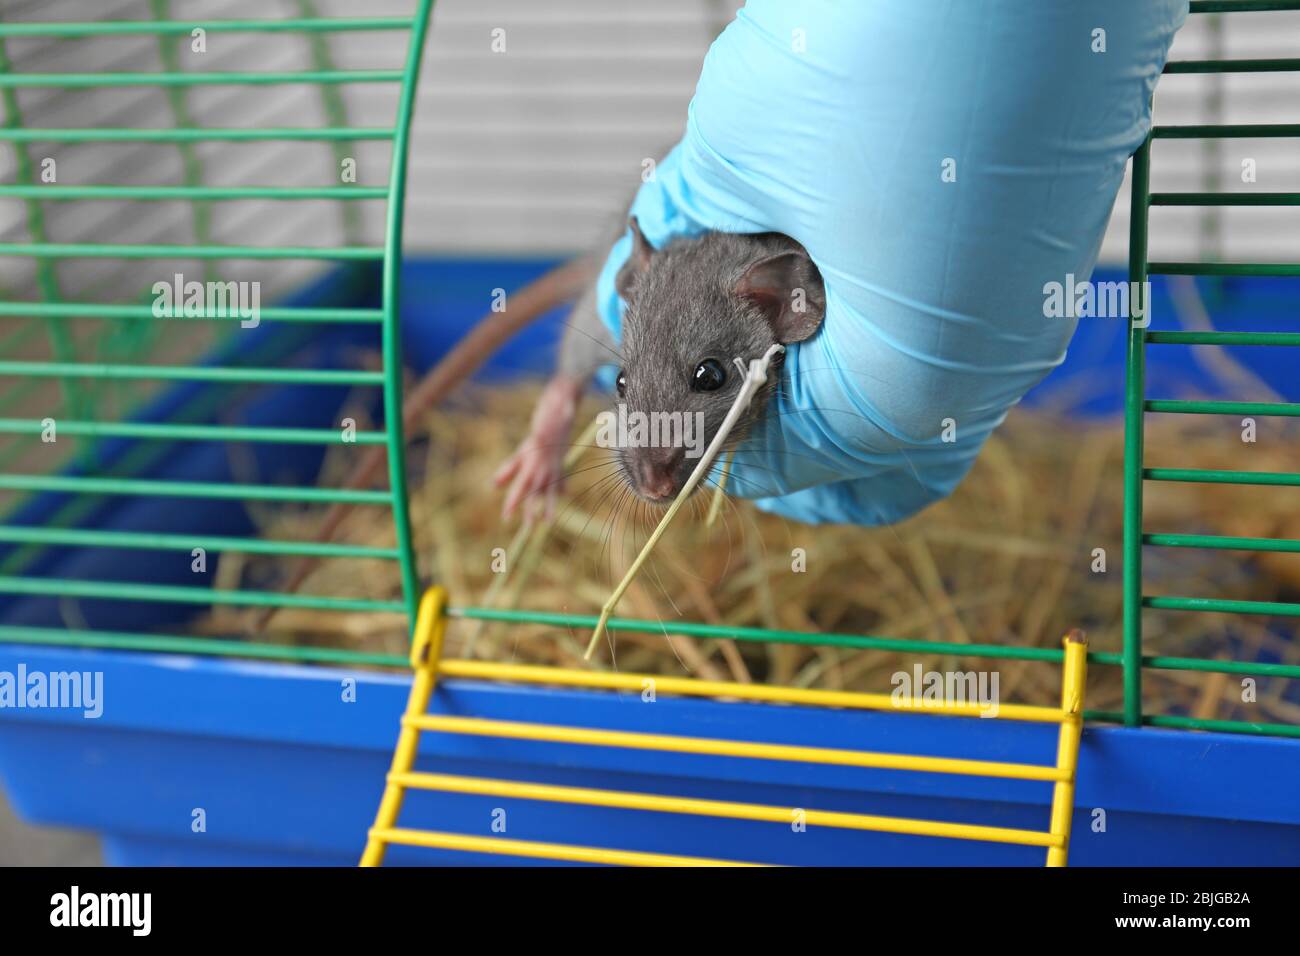 https://c8.alamy.com/comp/2BJGB2A/hand-of-scientist-putting-cute-rat-back-in-cage-after-experiment-in-laboratory-2BJGB2A.jpg